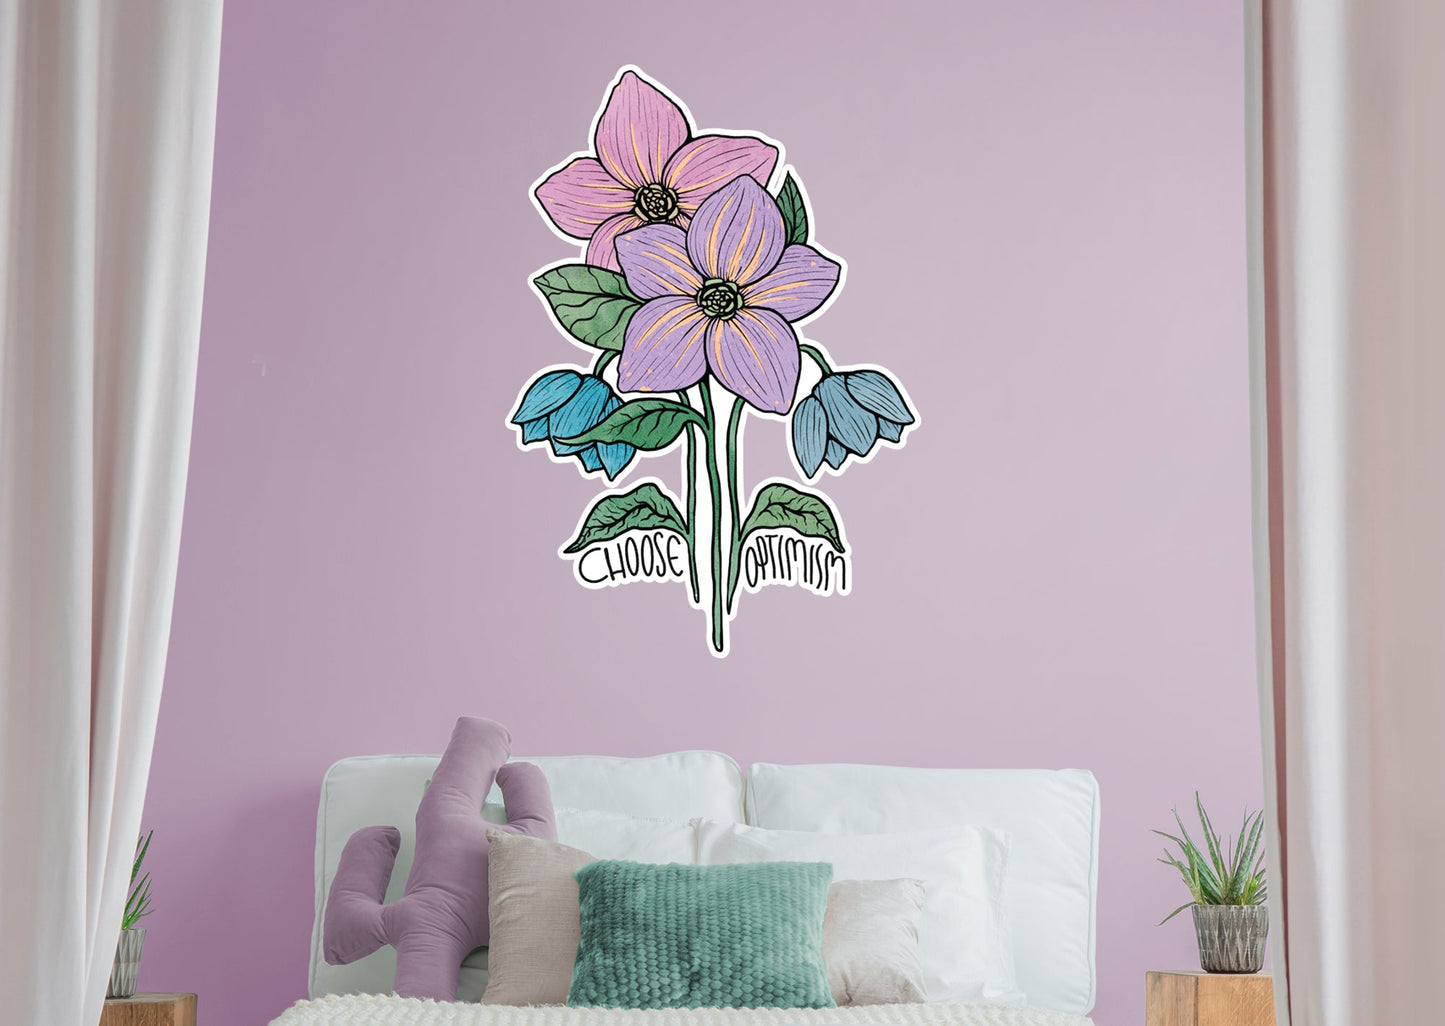 Choose Optimism Purple Floral        - Officially Licensed Big Moods Removable     Adhesive Decal